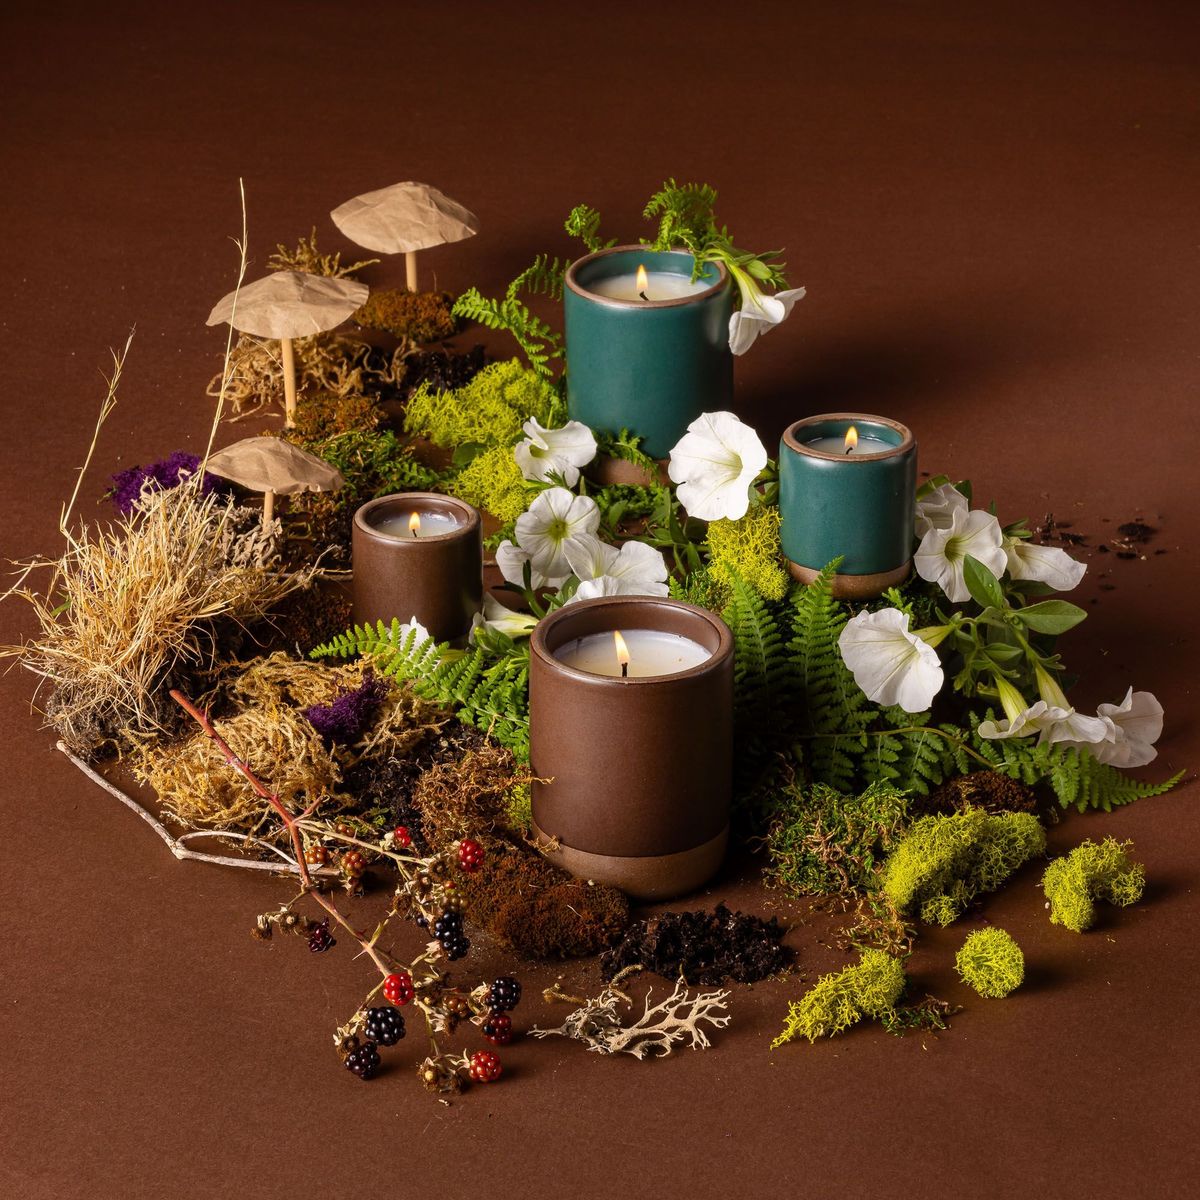 Four candles in ceramic vessels in dark teal and brown colors. They are artfully arranged and surrounded by moss, flowers, dried grass, mushrooms, and berries.